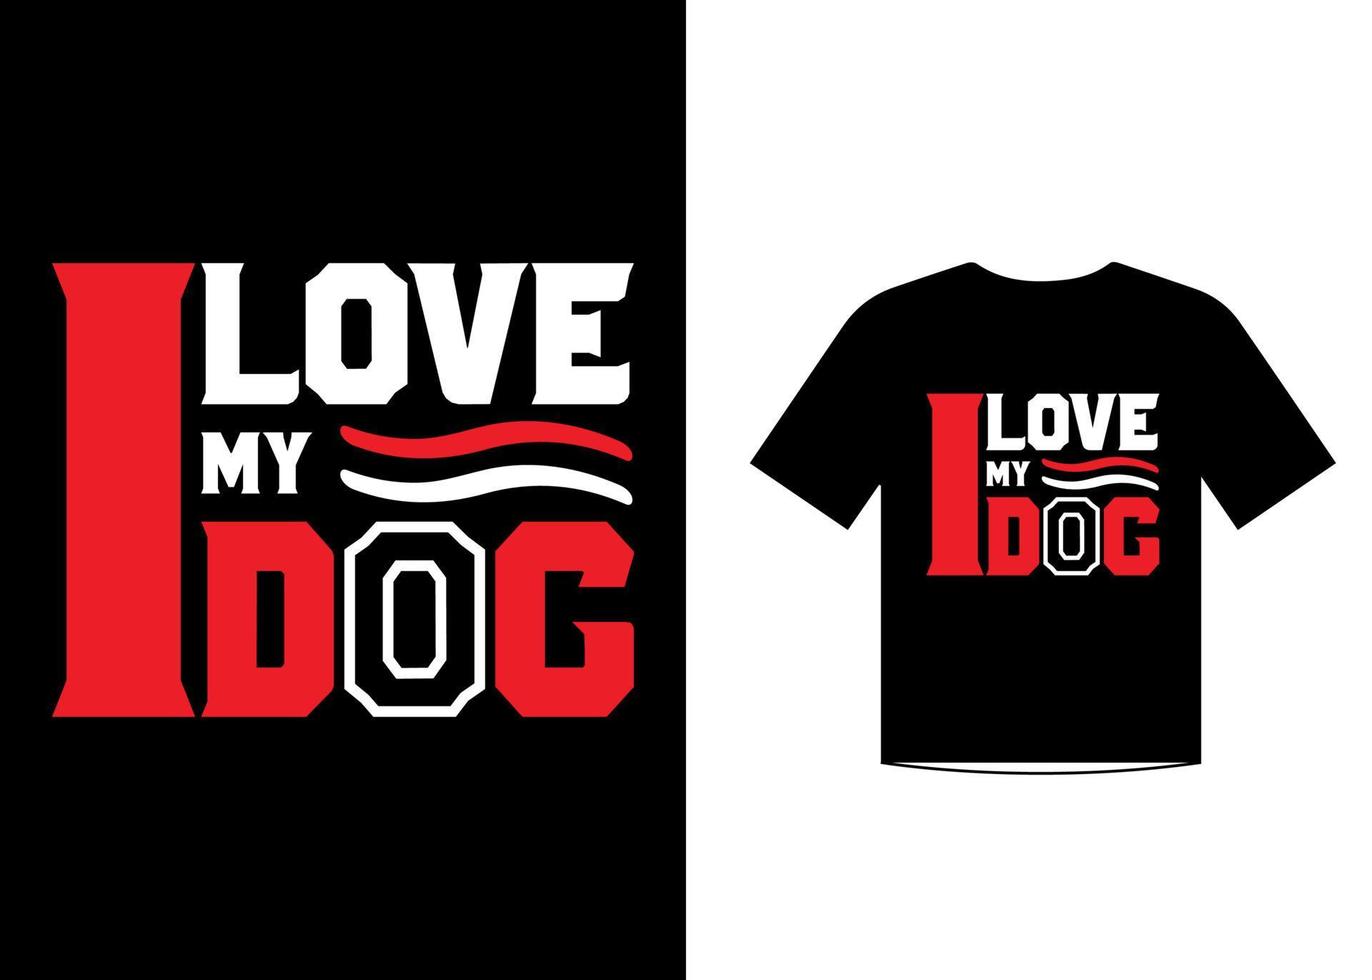 I love my dog love quotes t shirt template design vector